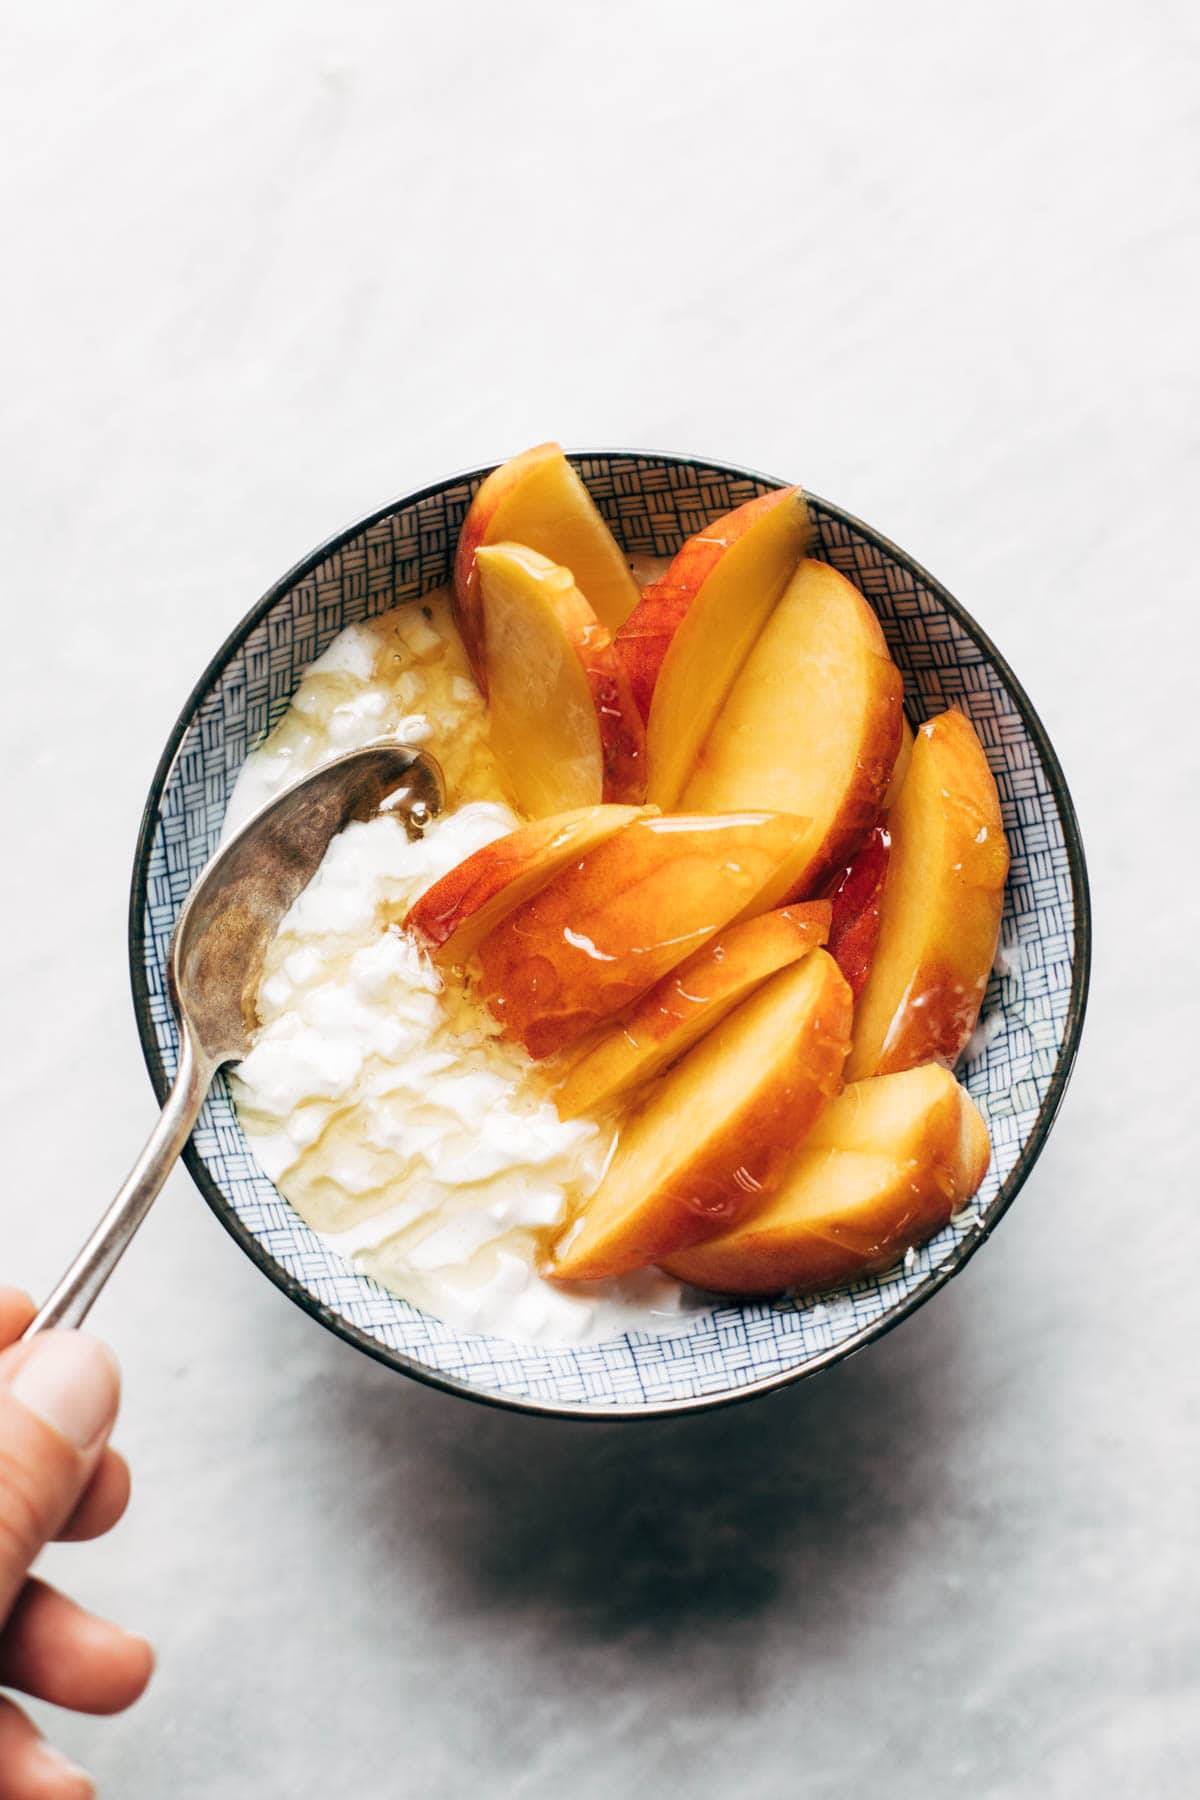 Peaches with cottage cheese.